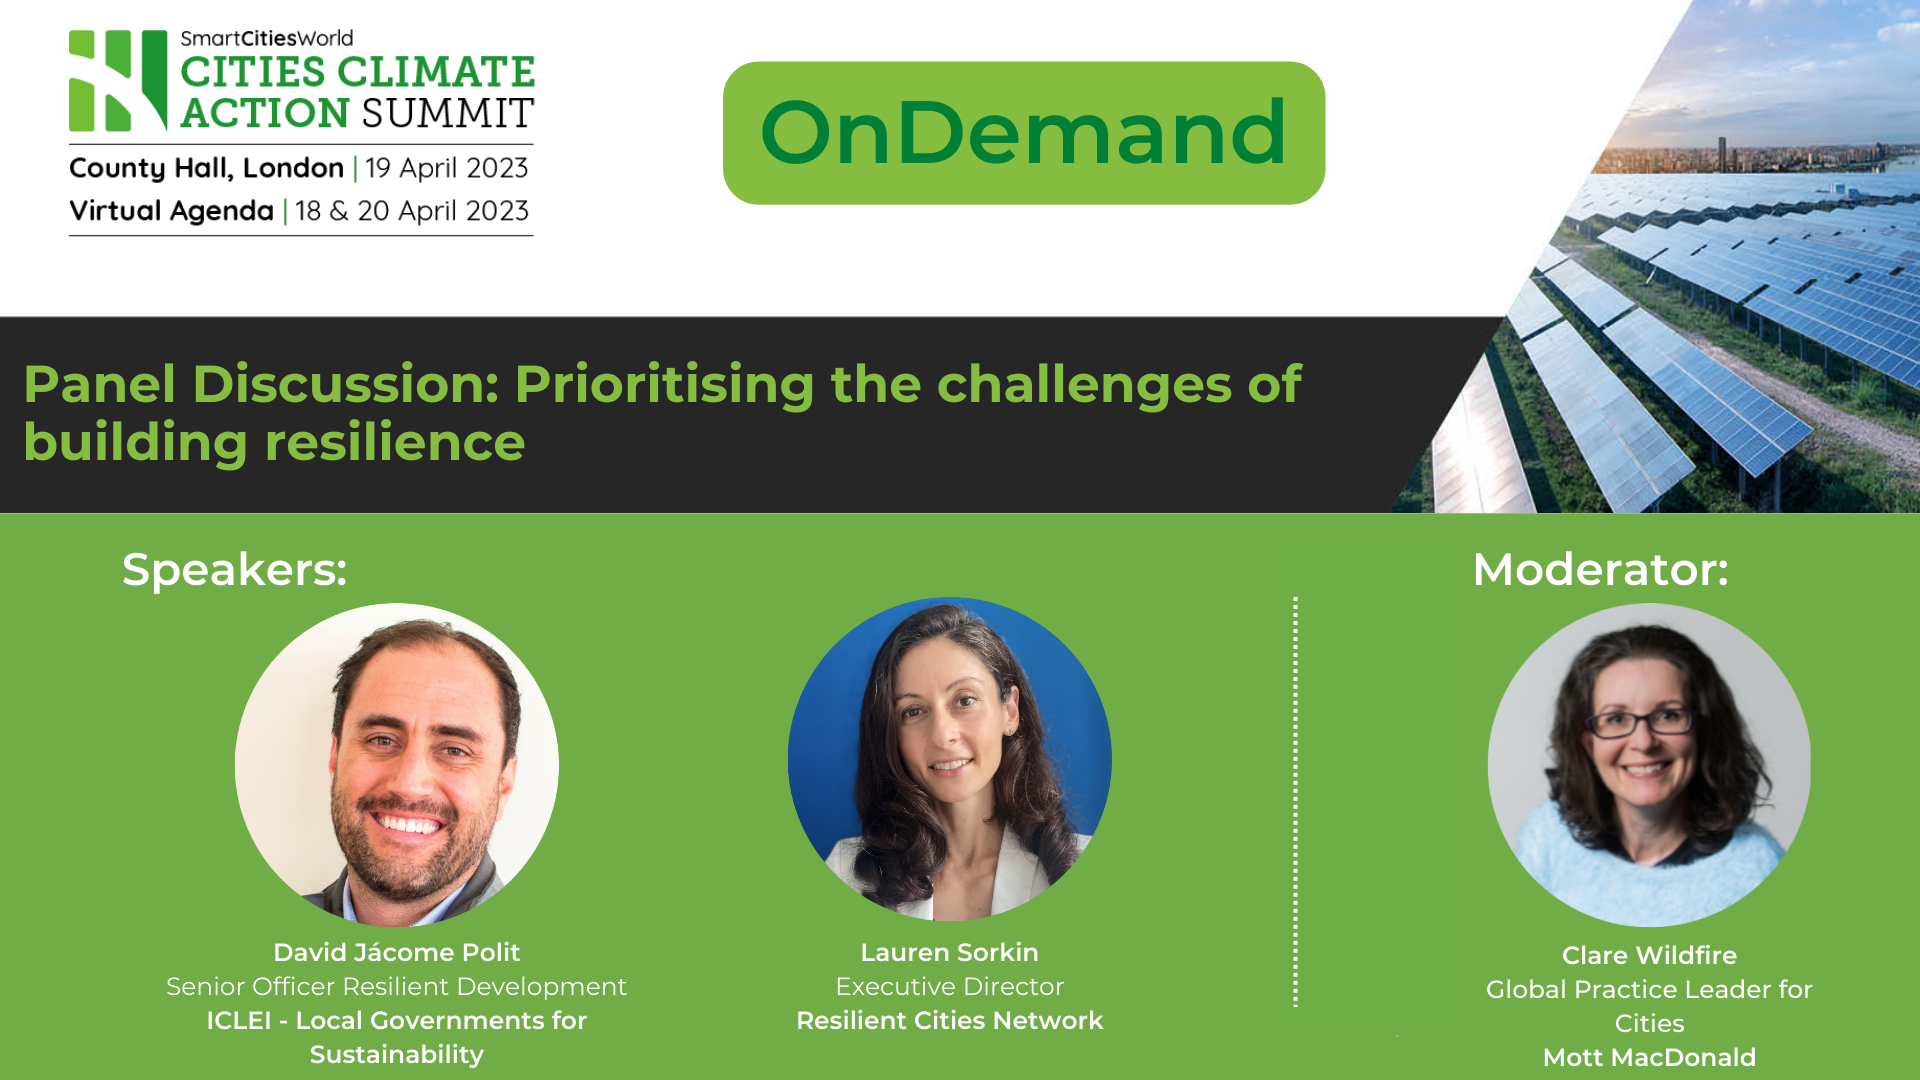 OnDemand Panel discussion: Prioritising the challenges of building resilience